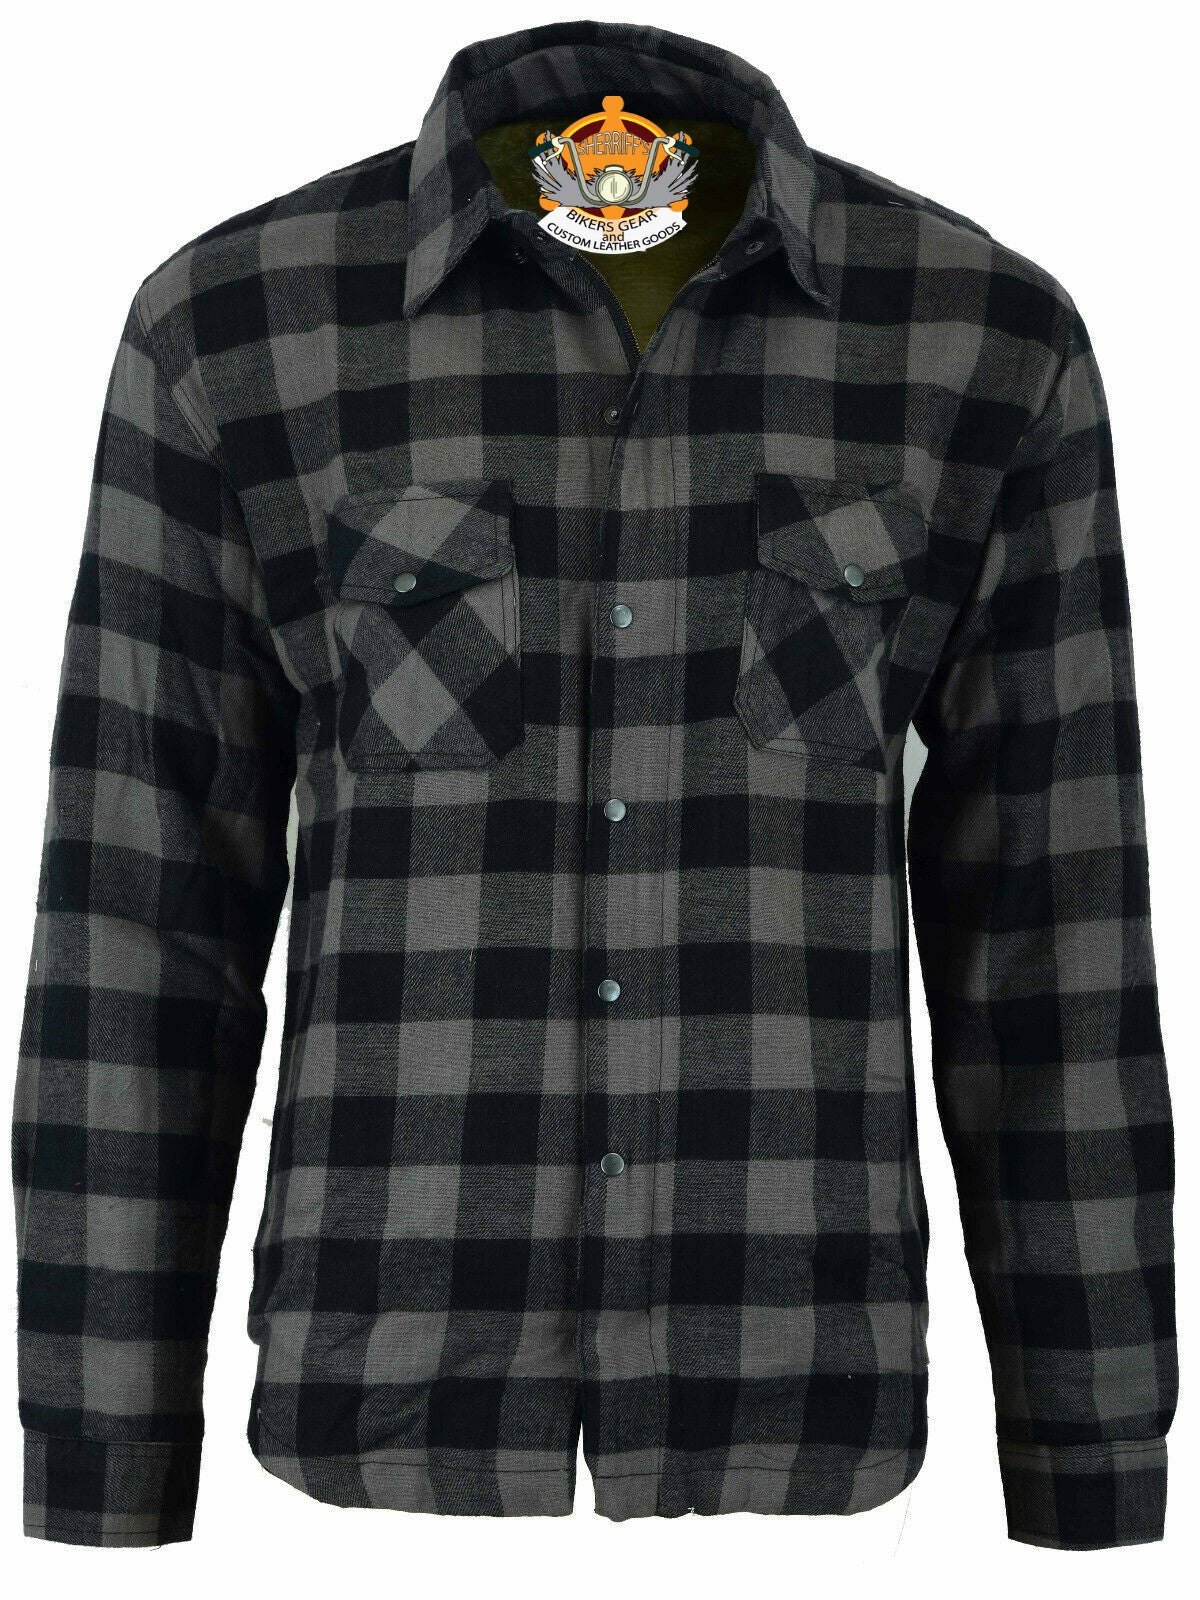 Flannel Shirt with Kevlar Lining - Black and Grey